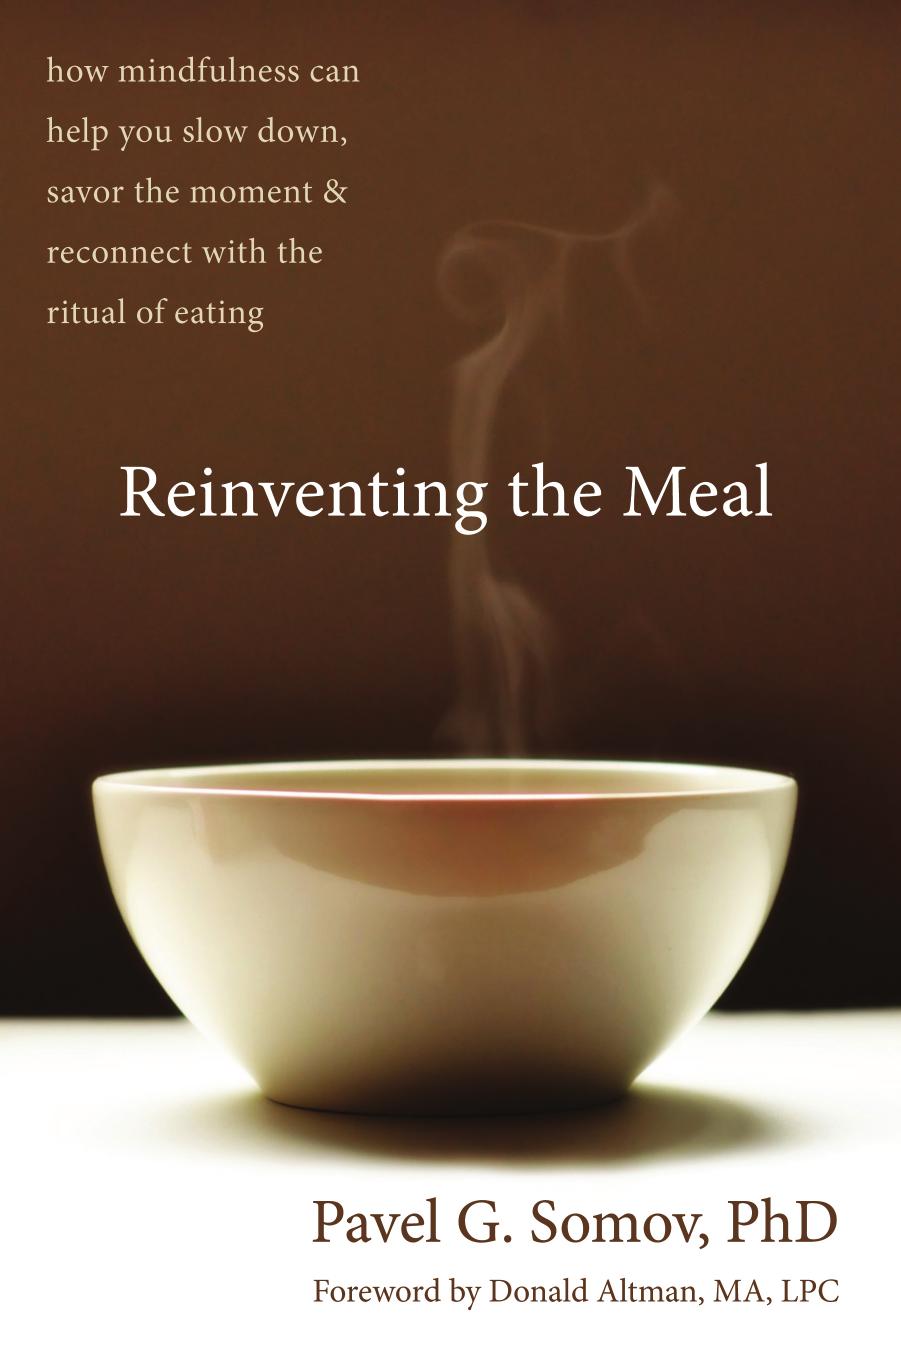 Reinventing the Meal: How Mindfulness Can Help You Slow Down, Savor the Moment, and Reconnect With the Ritual of Eating by Pavel Somov & Donald Altman Ma Lpc